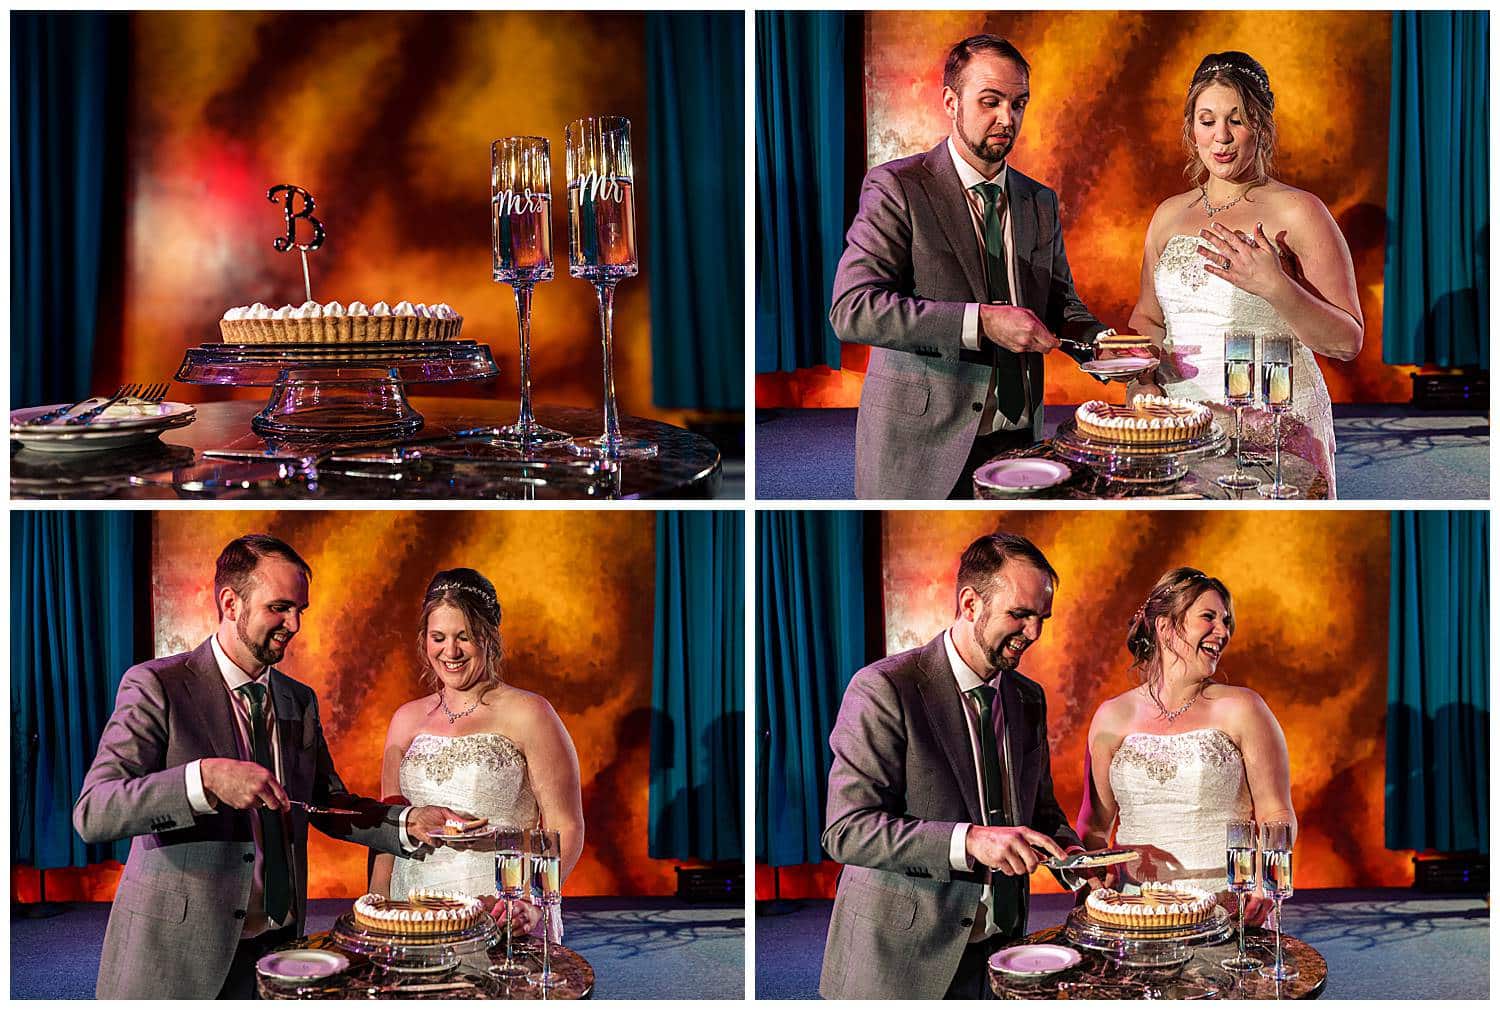 Funny cake cutting photos of bride and groom